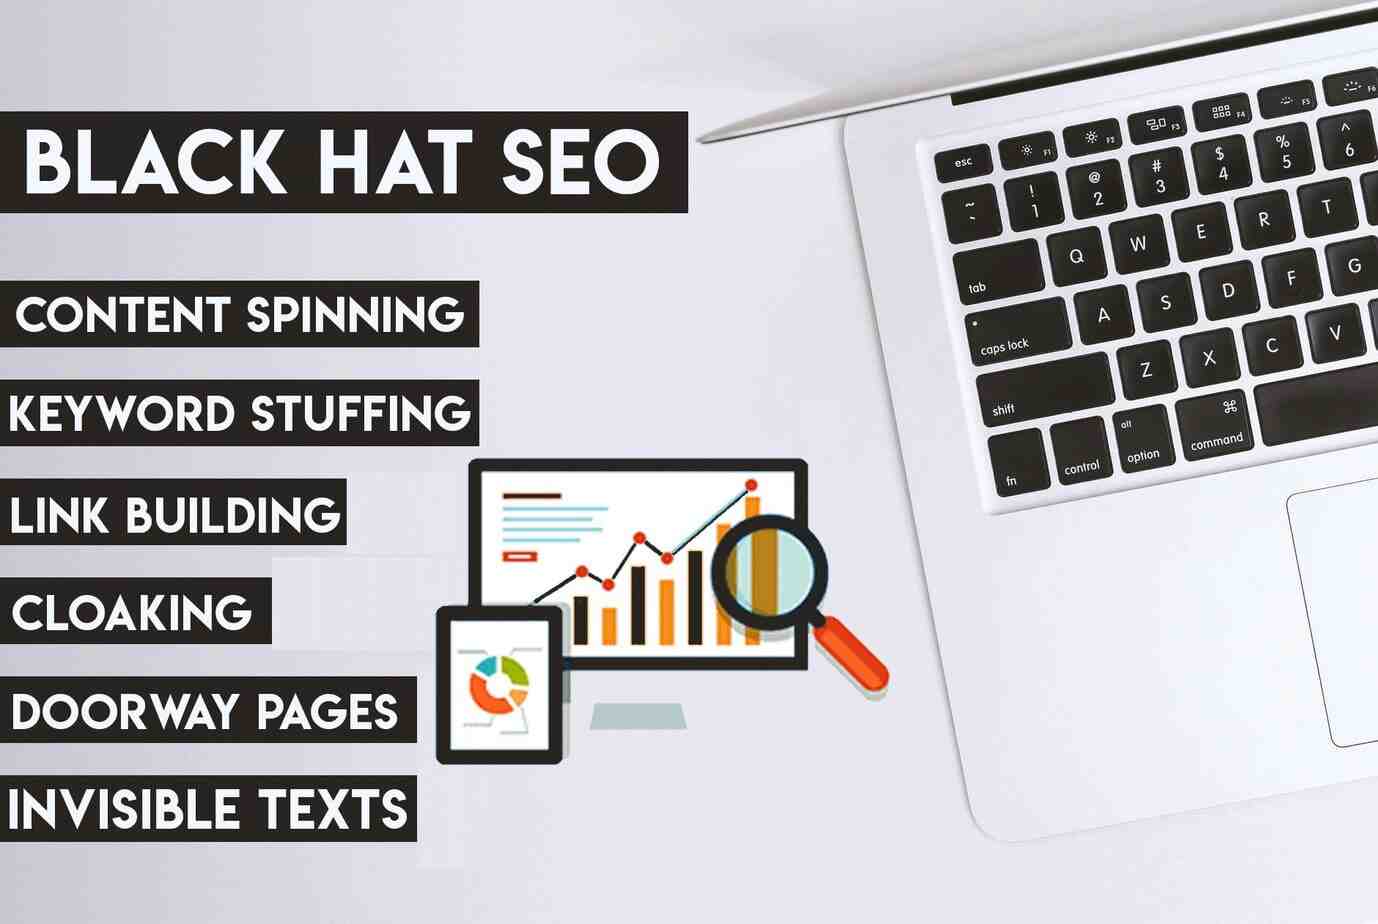 What black hat SEO practices will get you penalized?